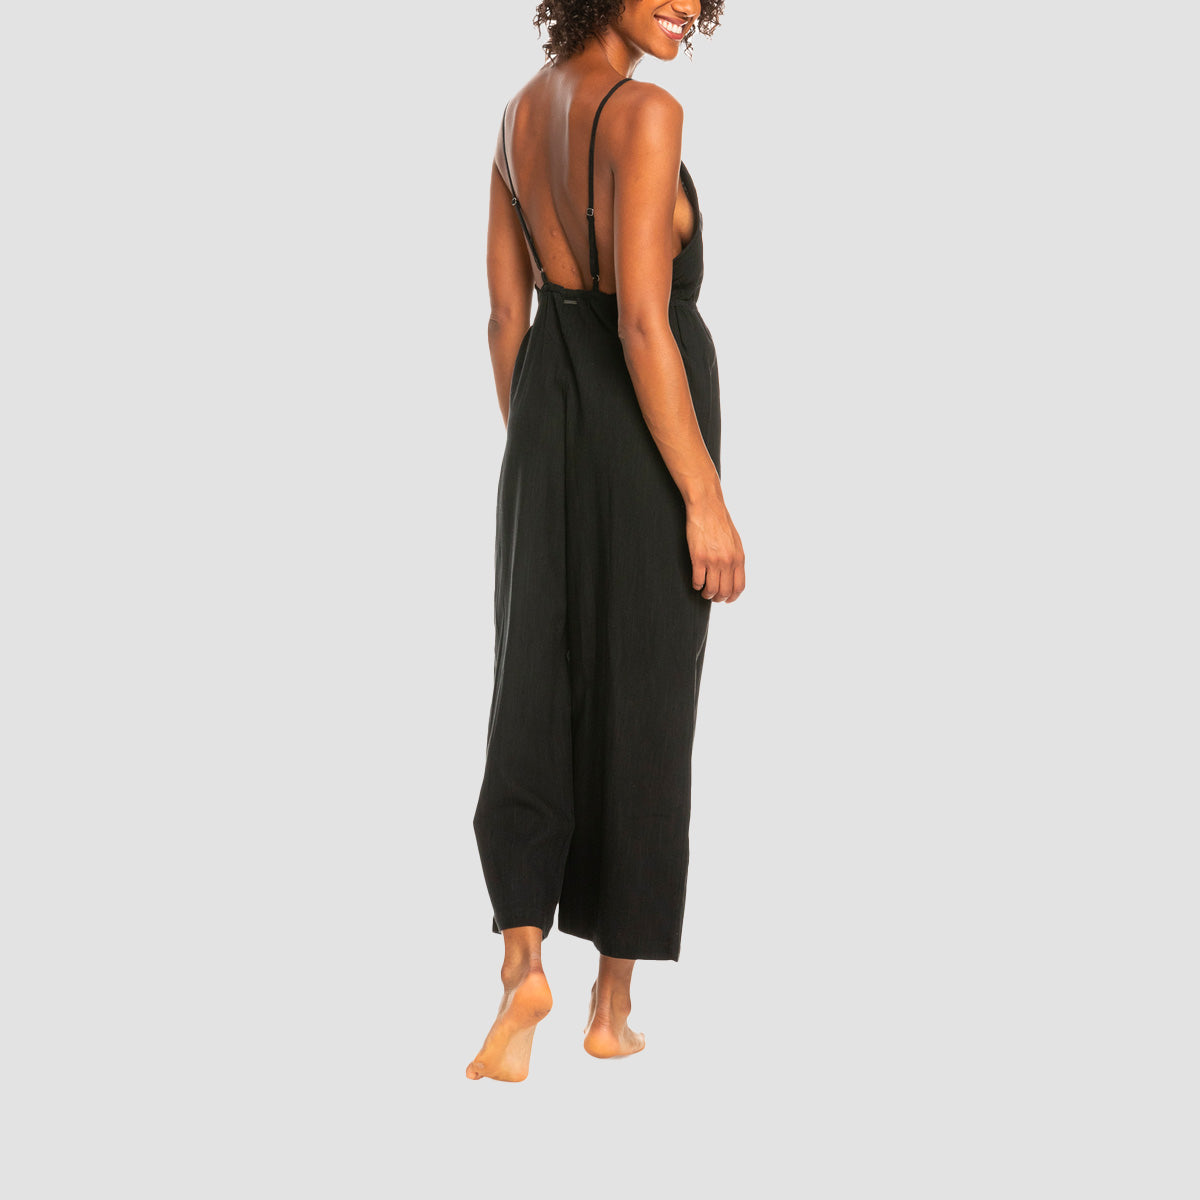 Roxy Never Ending Summer Strappy Jumpsuit Anthracite - Womens